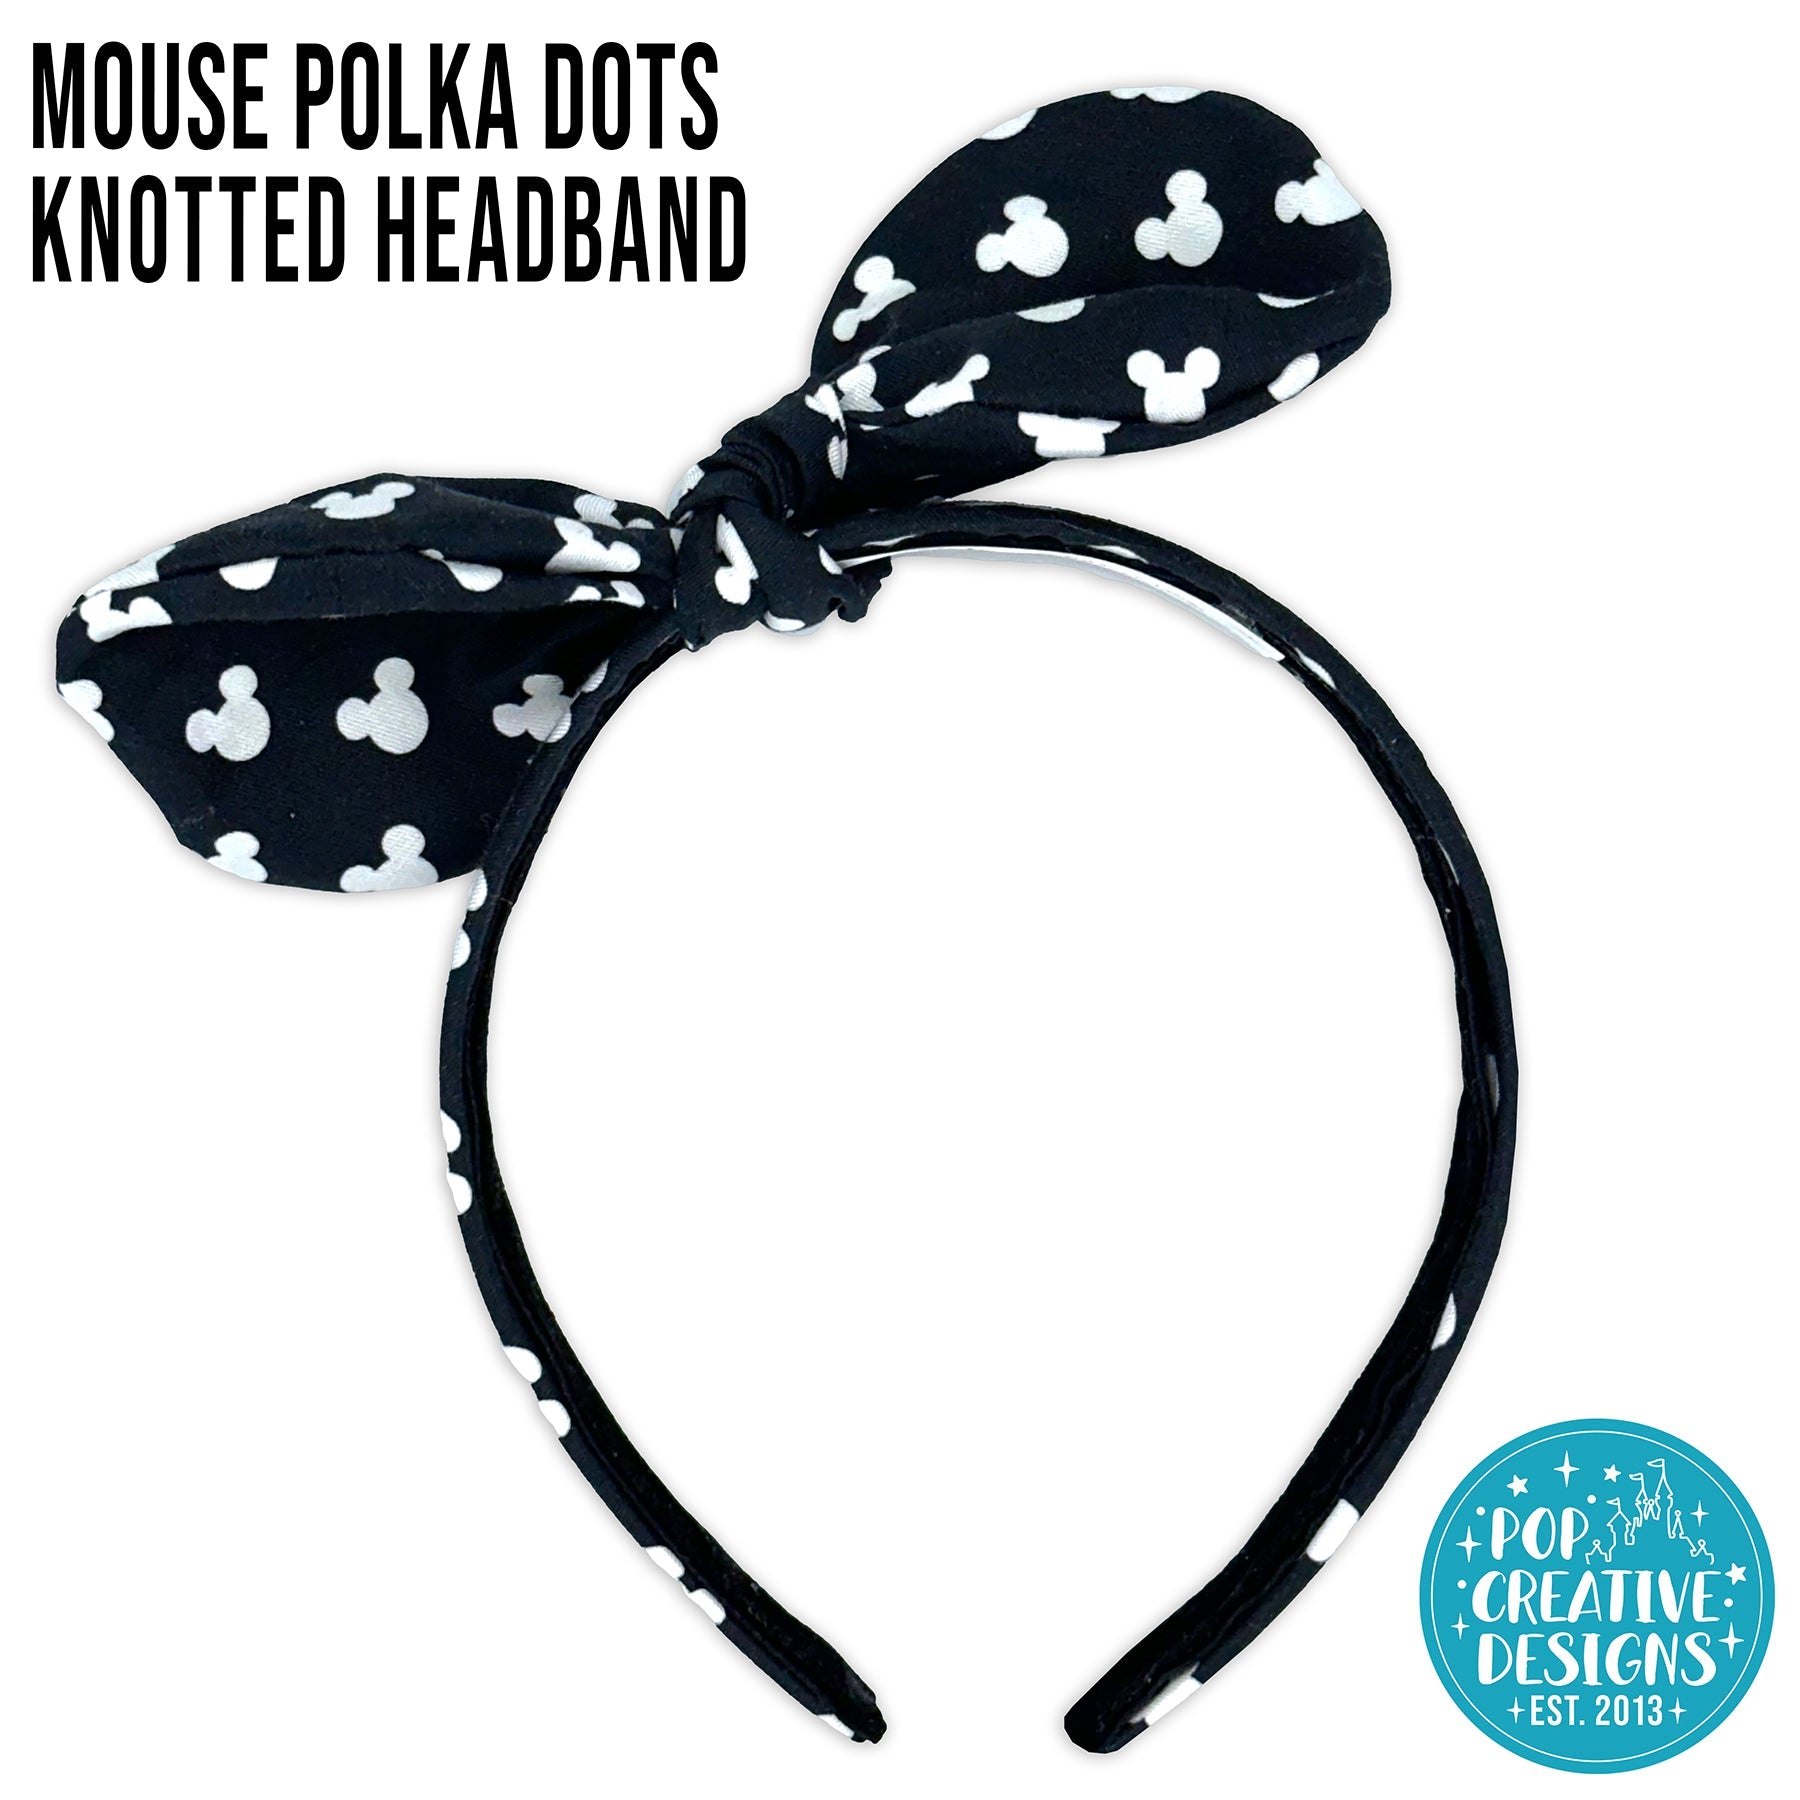 Mouse Polka Dots Knotted Headband